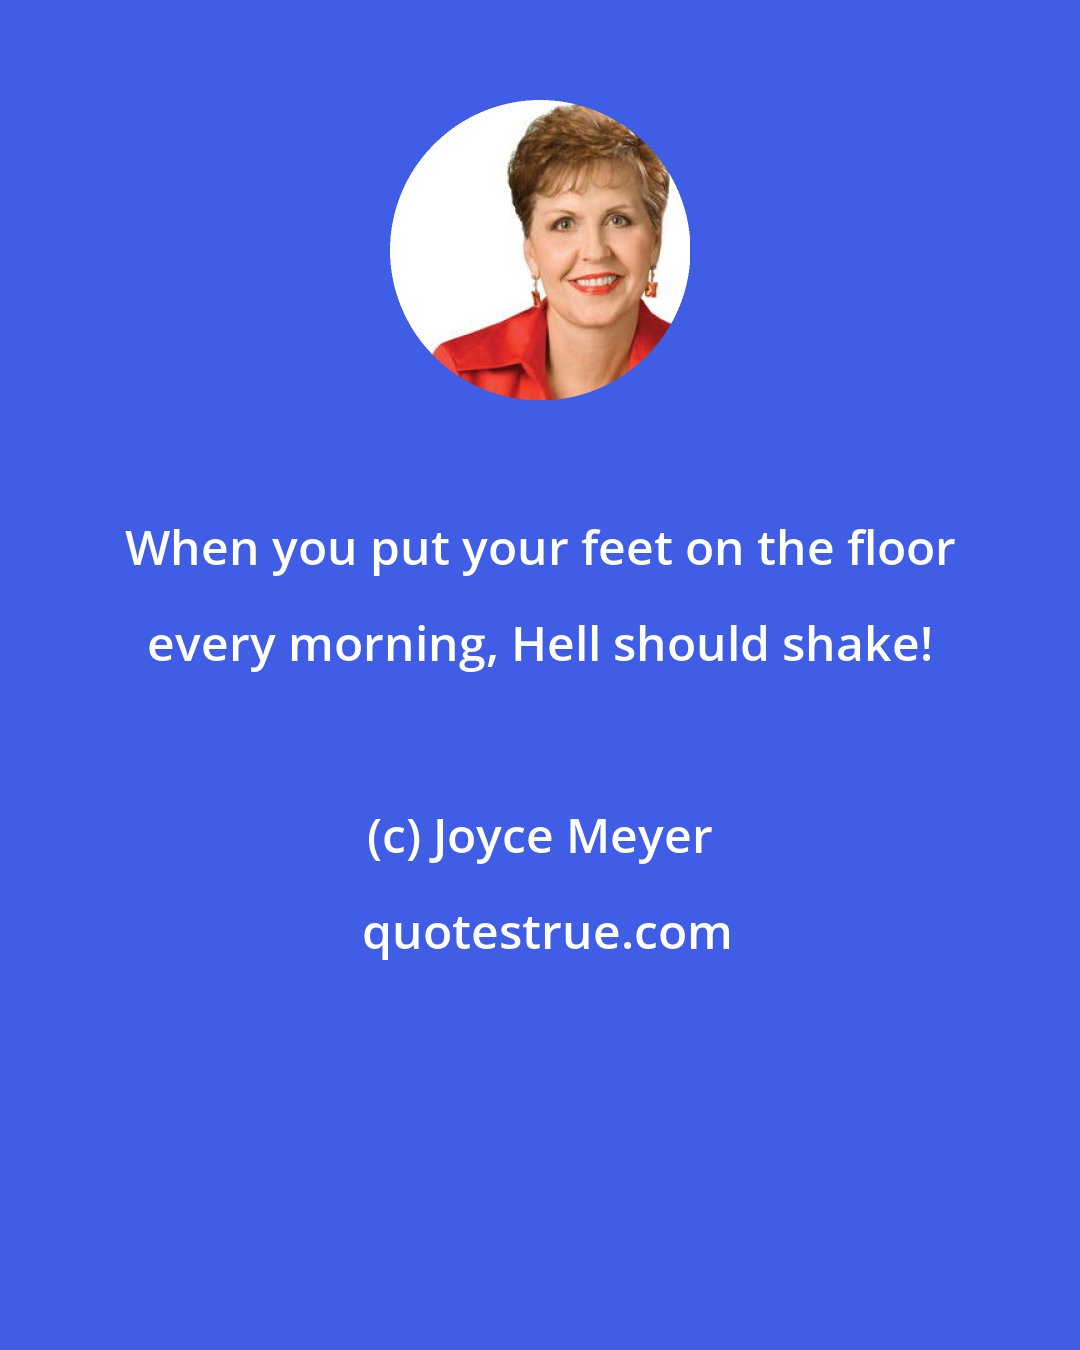 Joyce Meyer: When you put your feet on the floor every morning, Hell should shake!